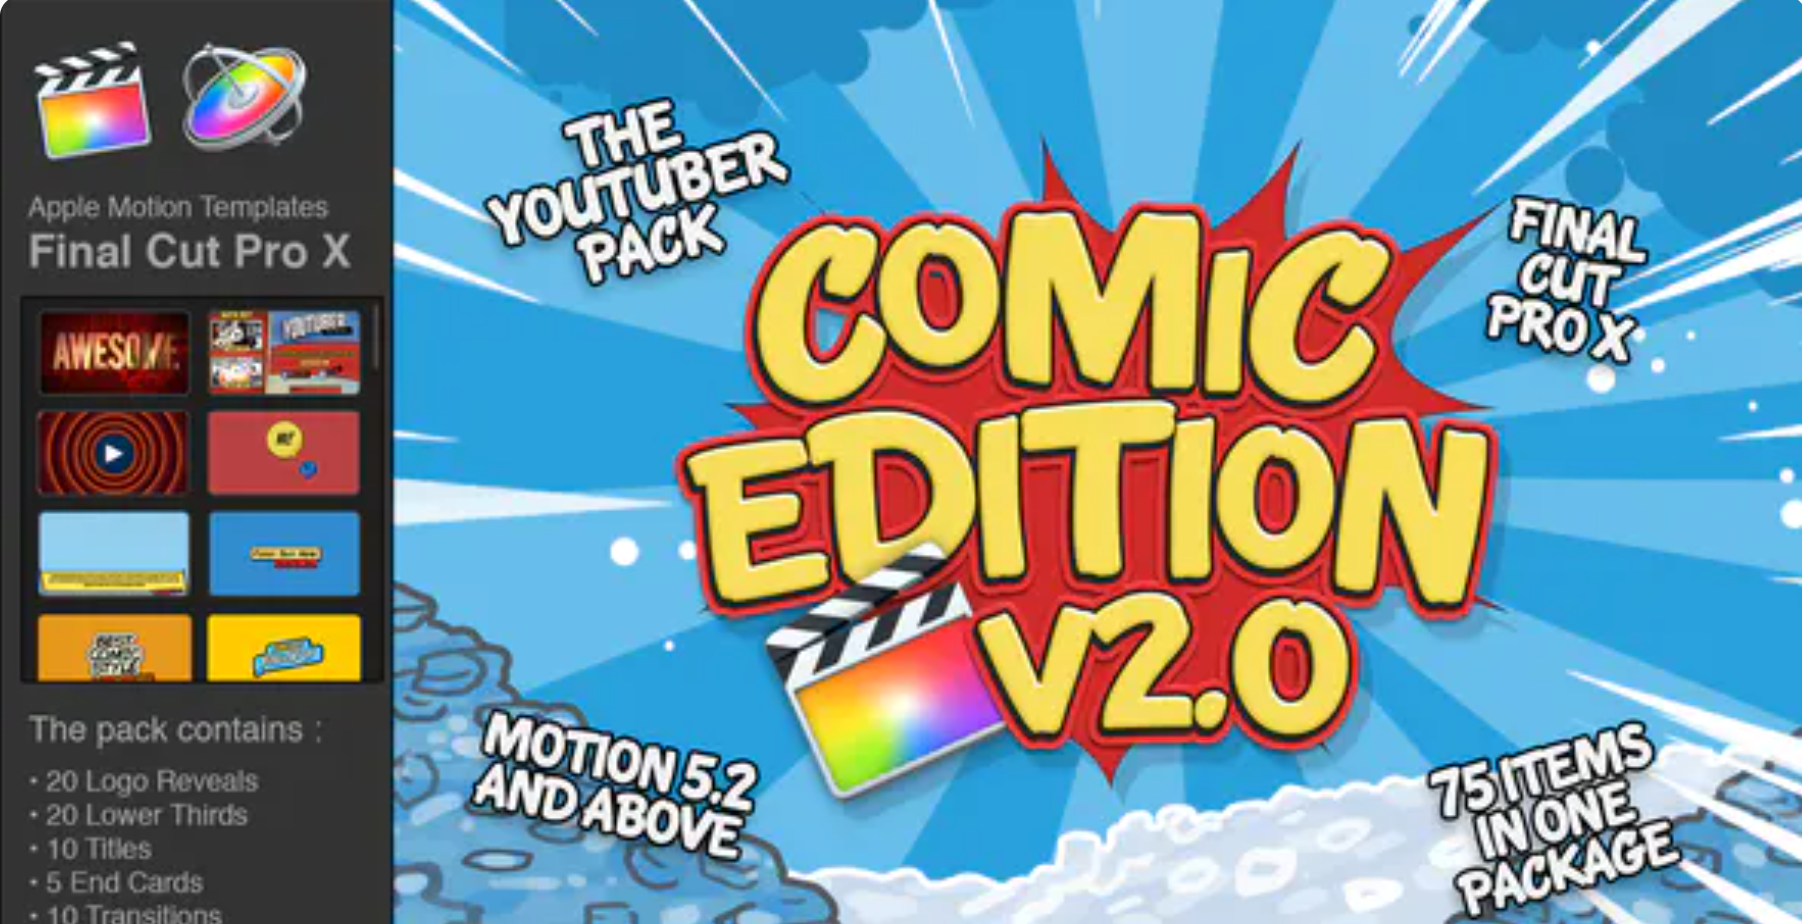 The YouTuber Pack - Comic Edition V2.0 - Final Cut Pro X 1